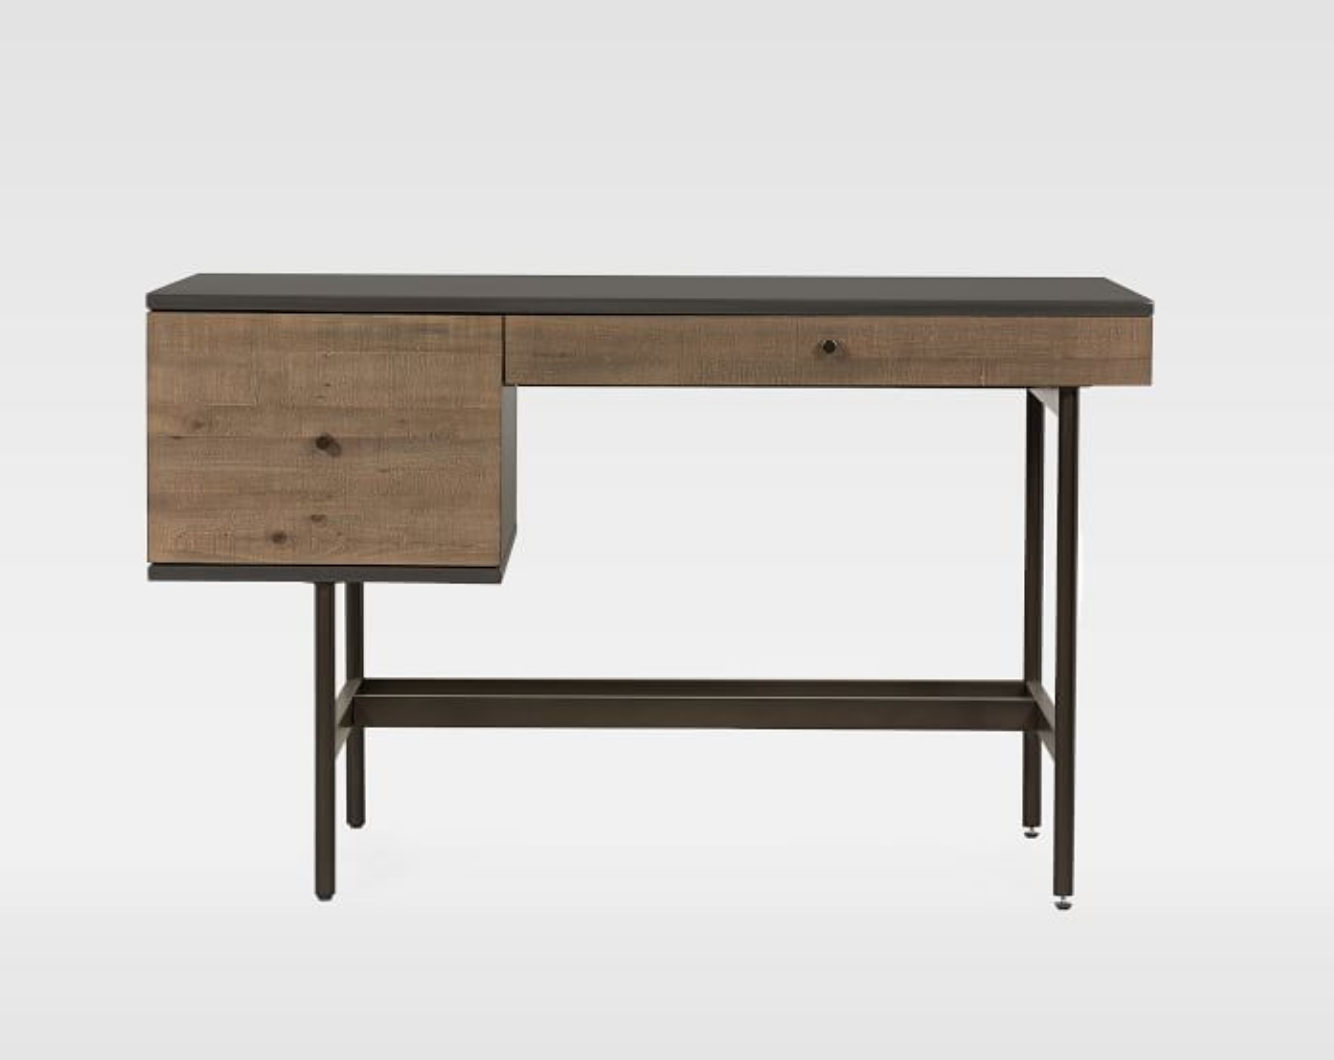 West Elm - Reclaimed Wood &amp; Lacquer Desk - Charcoal - $999